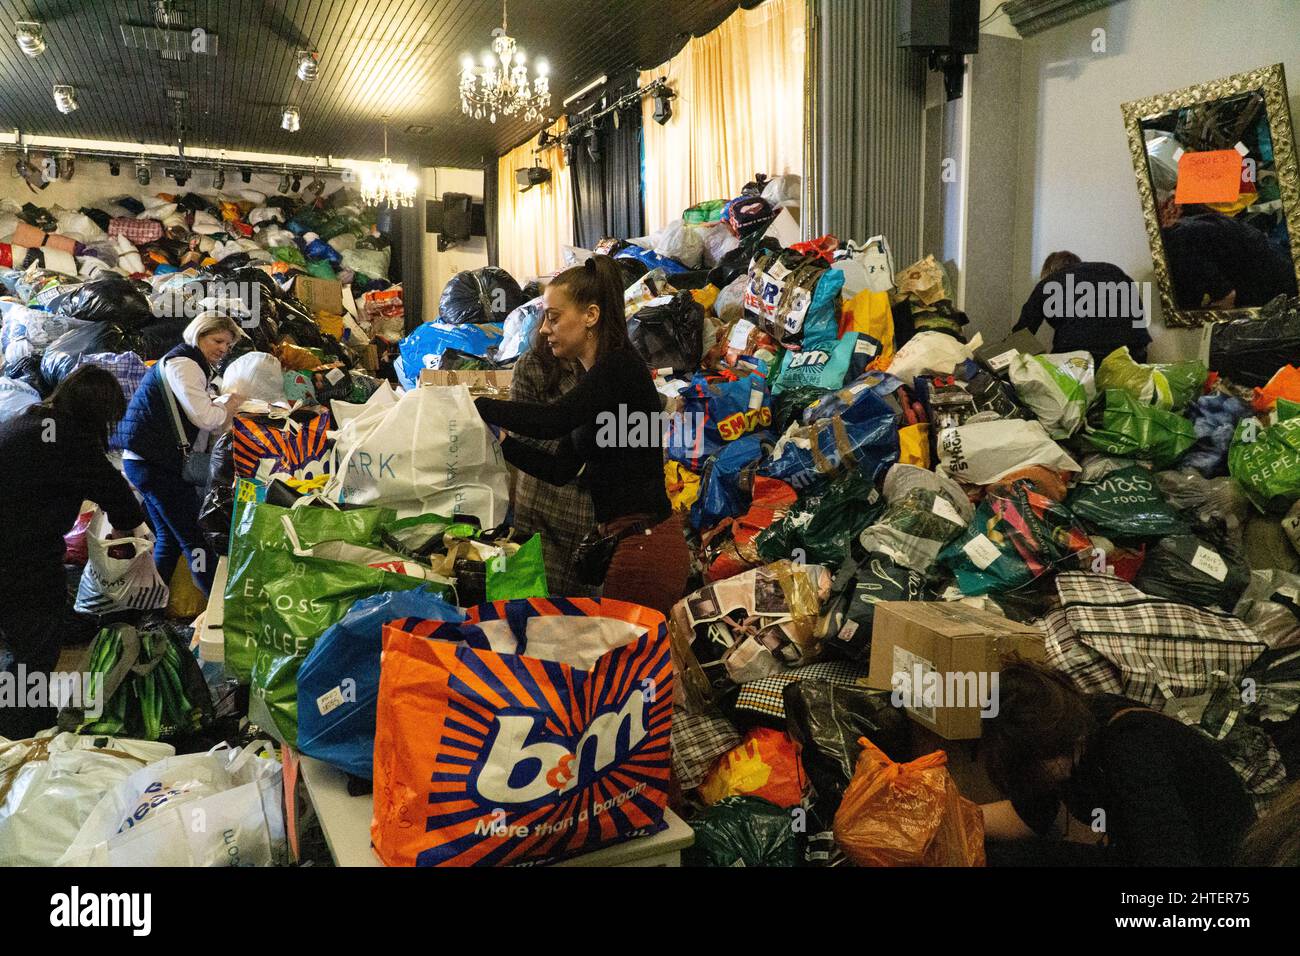 London, UK, 28 February 2021: Aid donations for Ukranian refugees are gathered at the White Eagle Club, a Polish community centre in Balham. Huge quantities have been donated and are being sorted by volunteers and then loaded on to pallets to take on lorries across Europe. Anna Watson/Alamy Live News Stock Photo